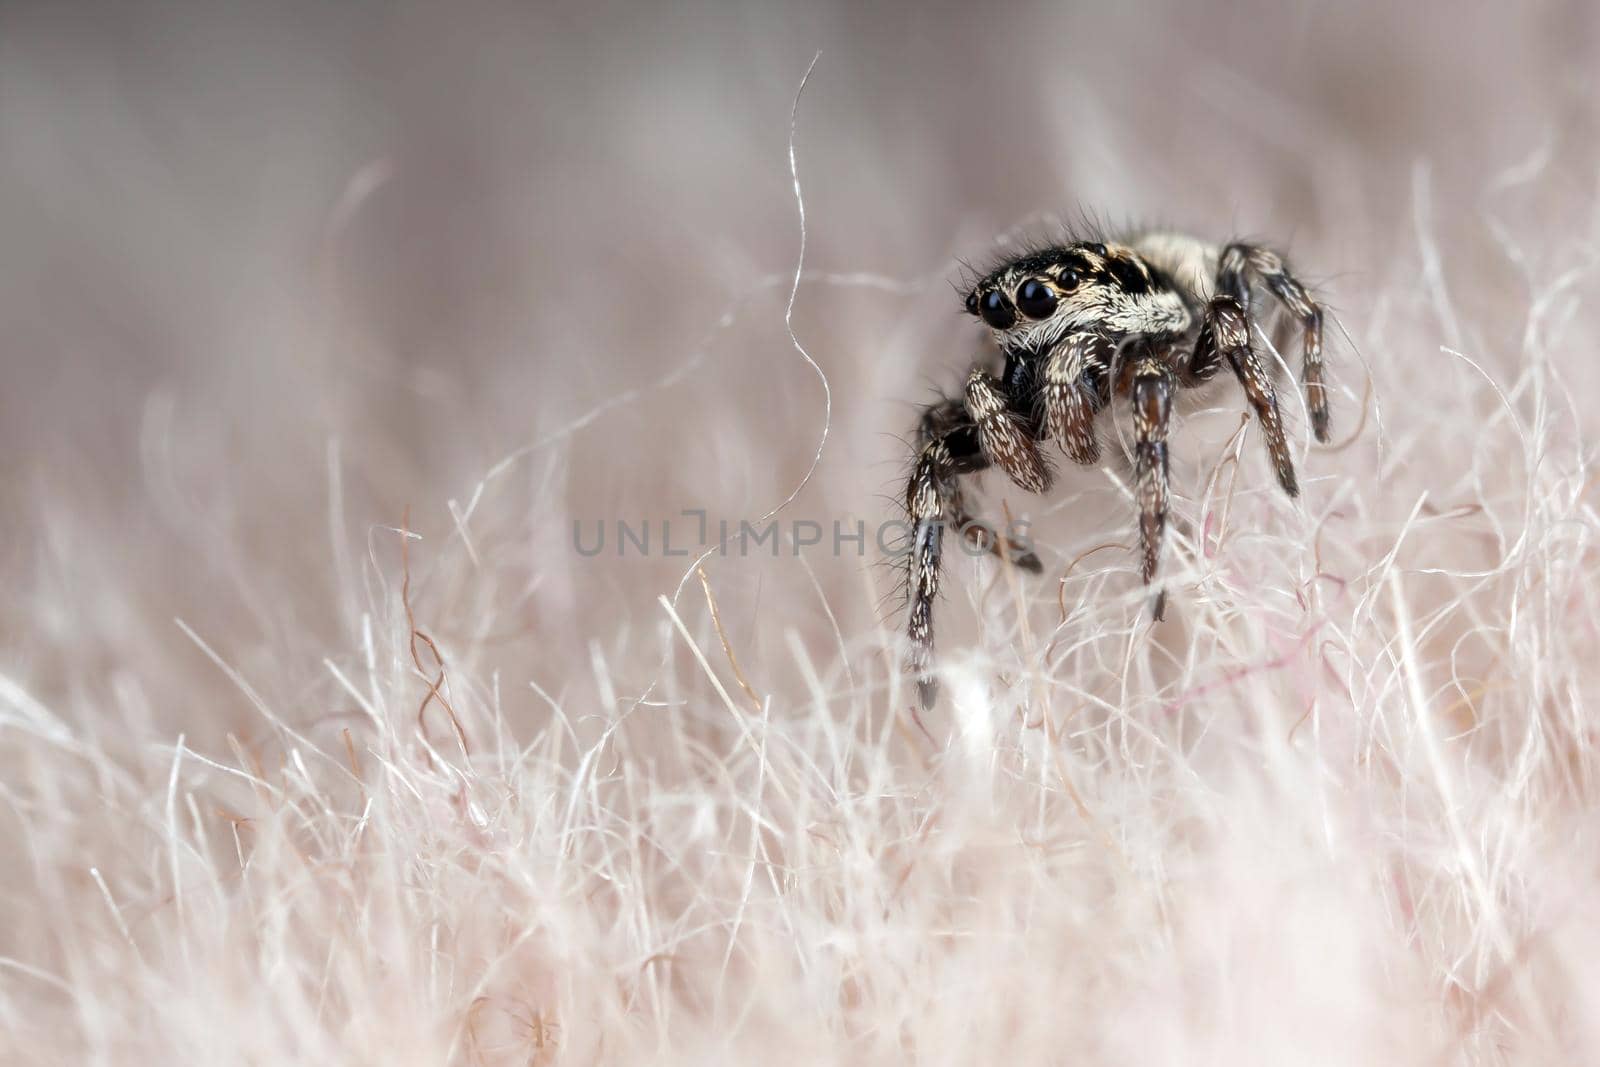 Funny little spider by Lincikas